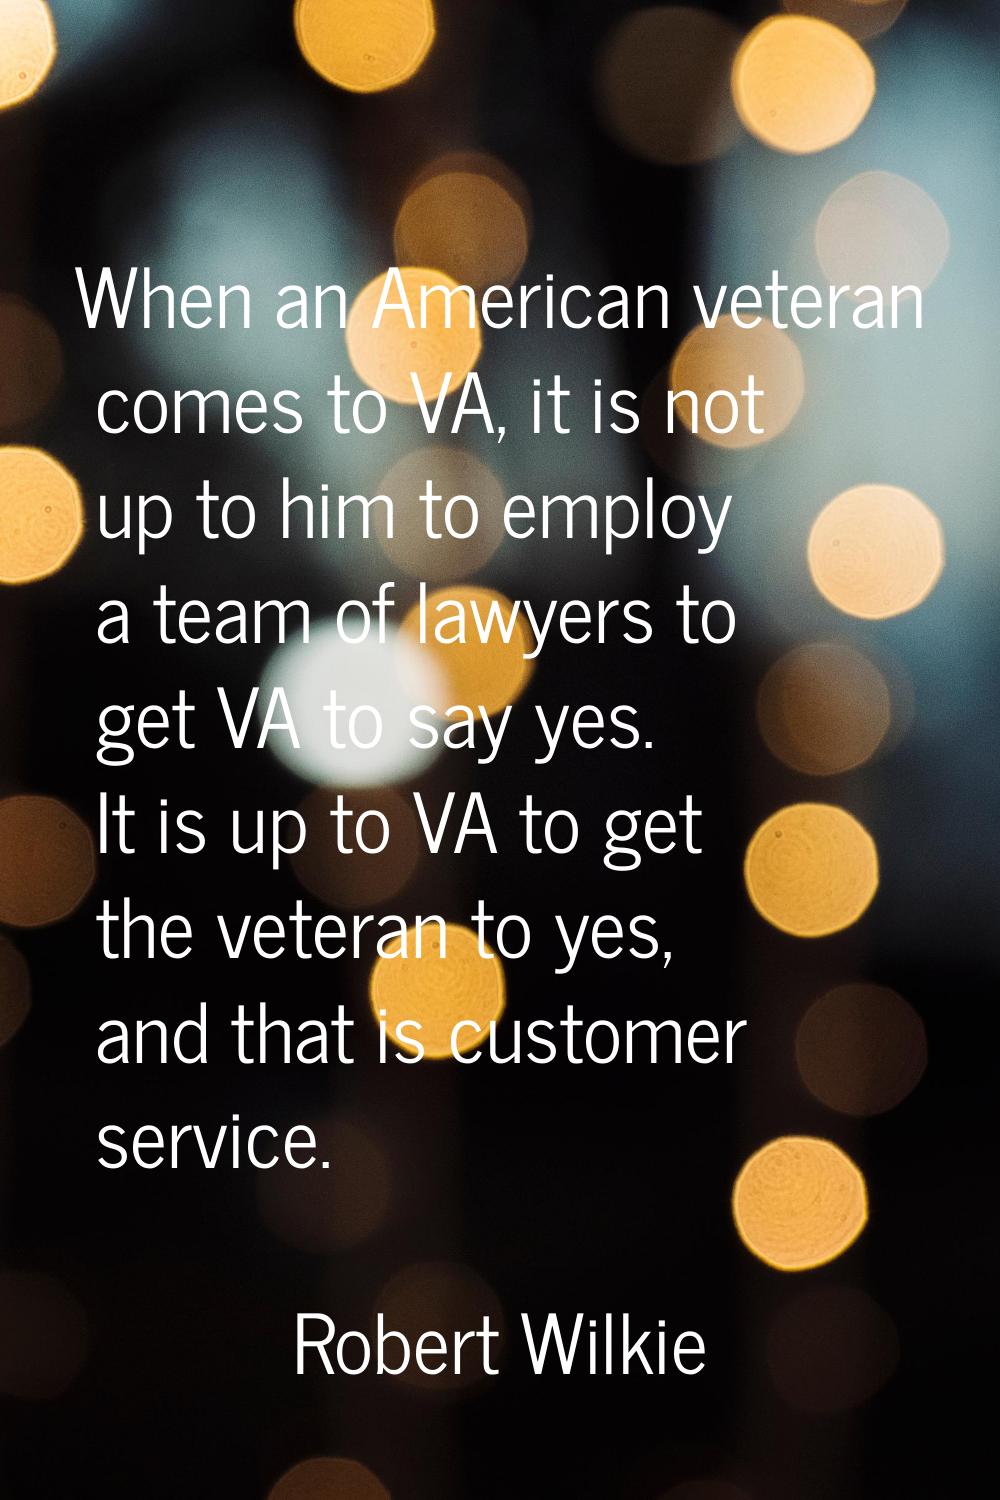 When an American veteran comes to VA, it is not up to him to employ a team of lawyers to get VA to 